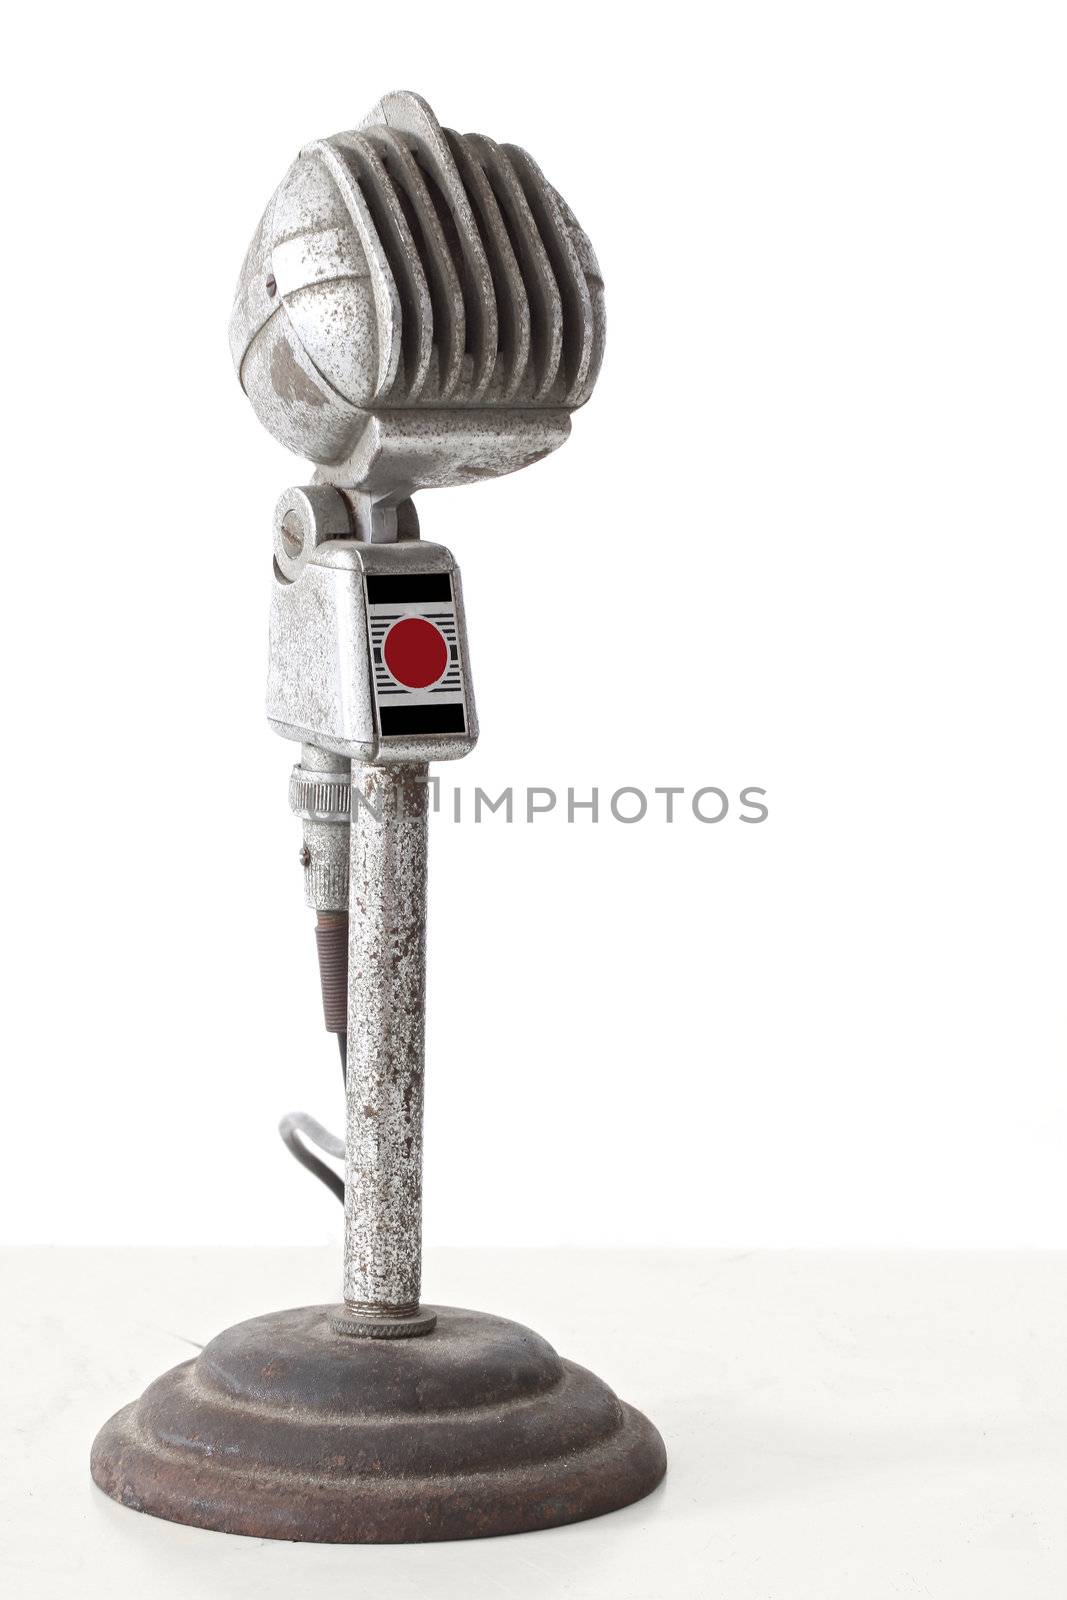 vintage microphone on white background